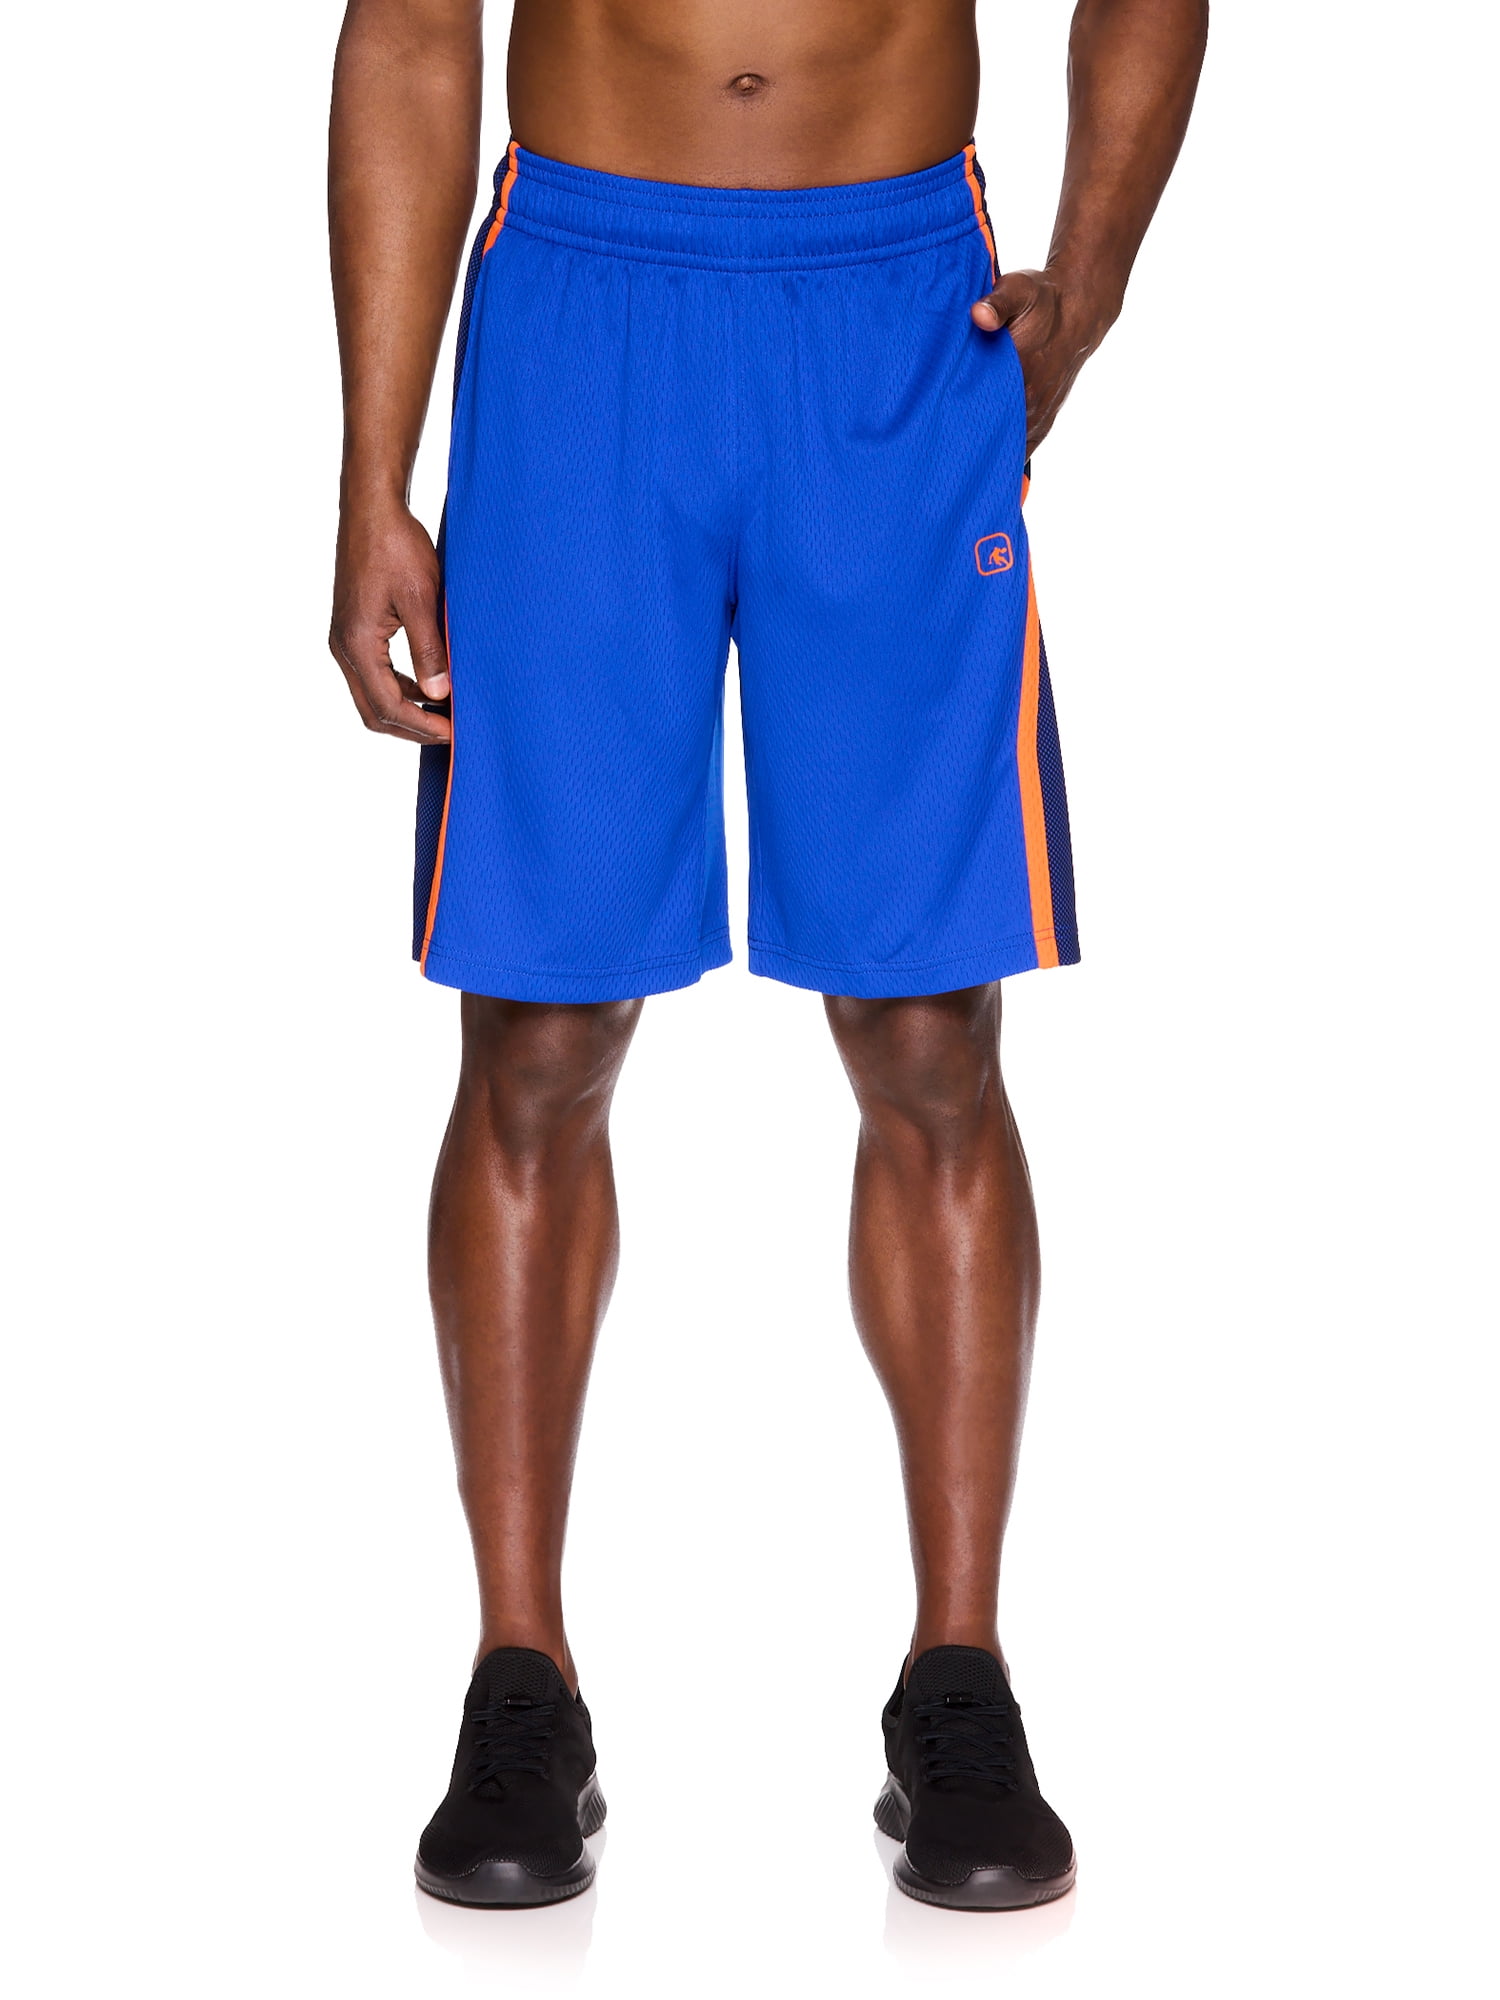 Size XL.*** *** New Mens Basketball Shorts by And1.**Adjustable Elastic Waist 